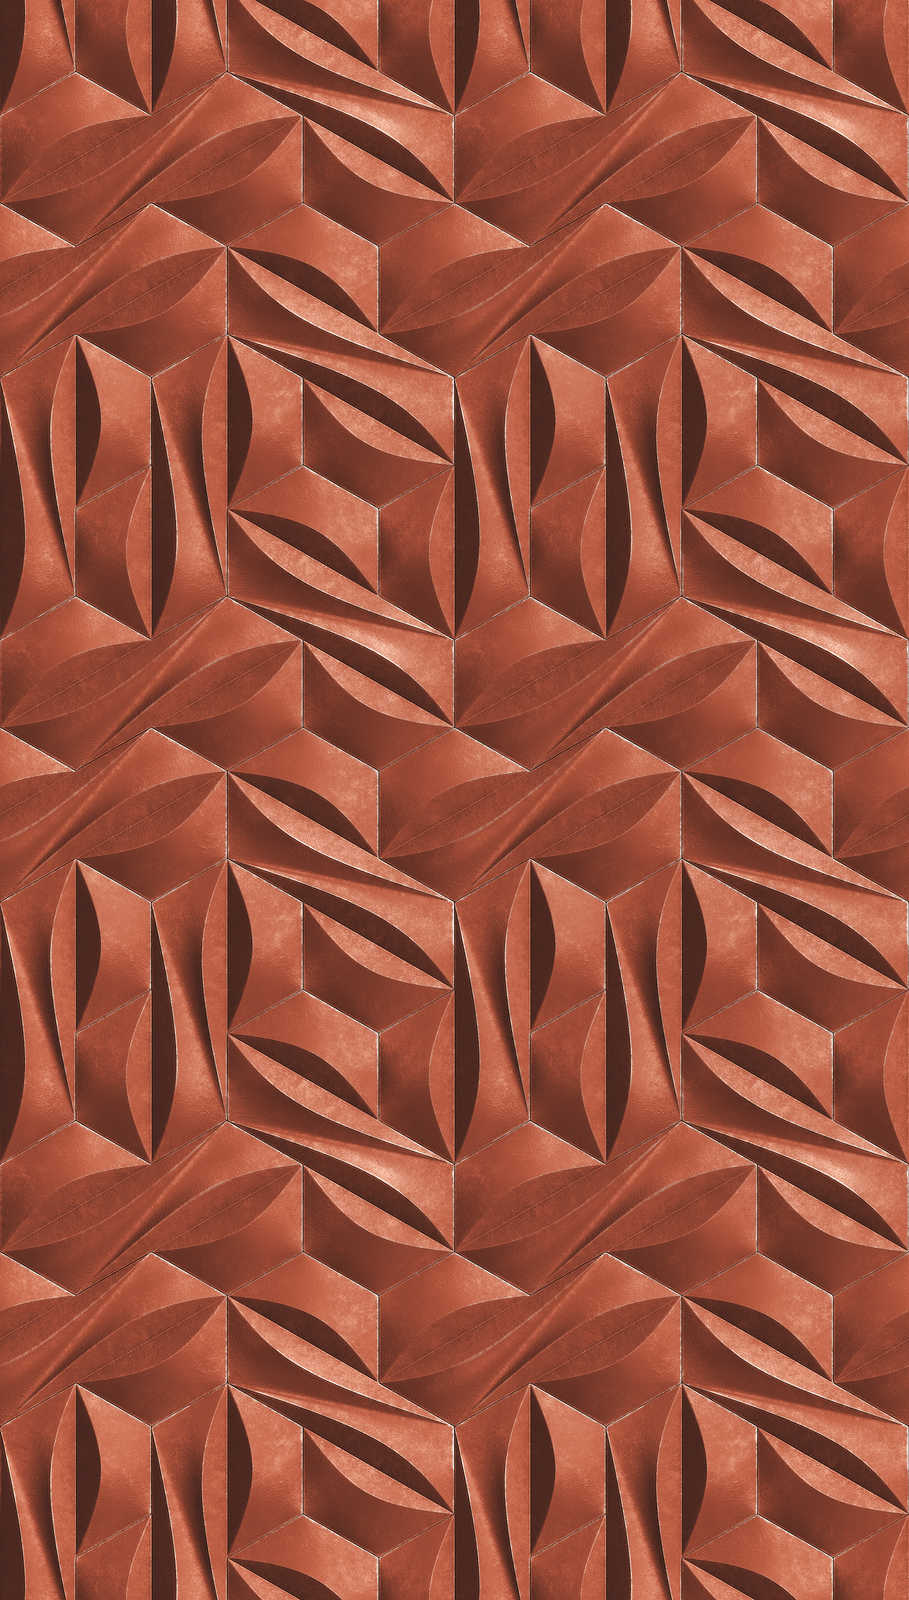             3D optics pattern wallpaper with metal look - red, white
        